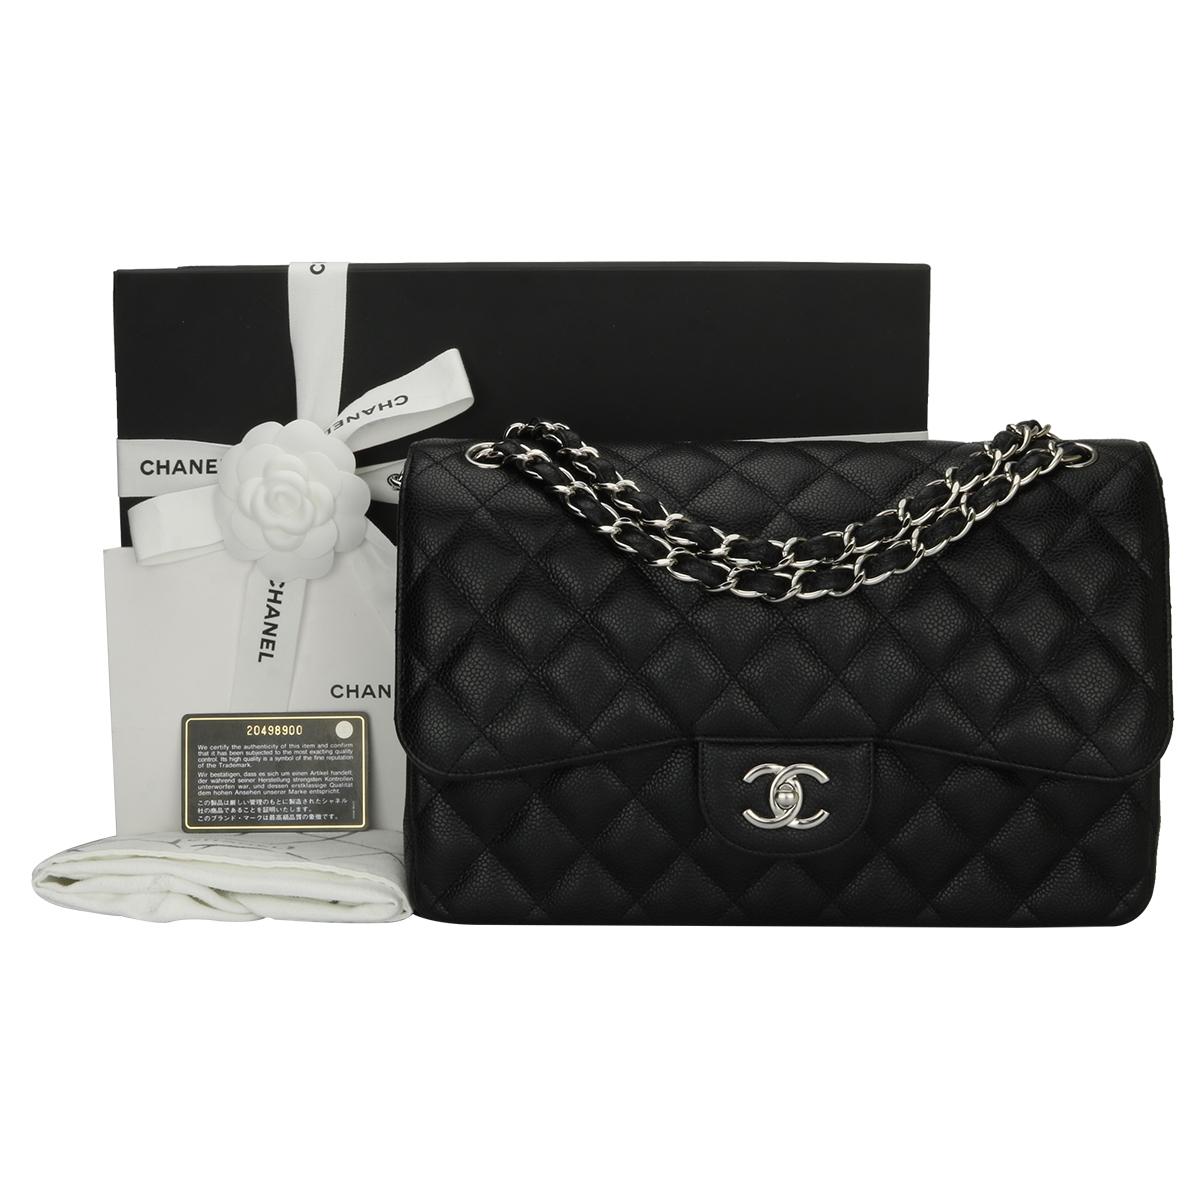 Authentic CHANEL Classic Jumbo Double Flap Black Caviar with Silver Hardware 2015.

This stunning bag is in a mint condition, the bag still holds its original shape, and the hardware is still very shiny.

Exterior Condition: Mint condition, corners